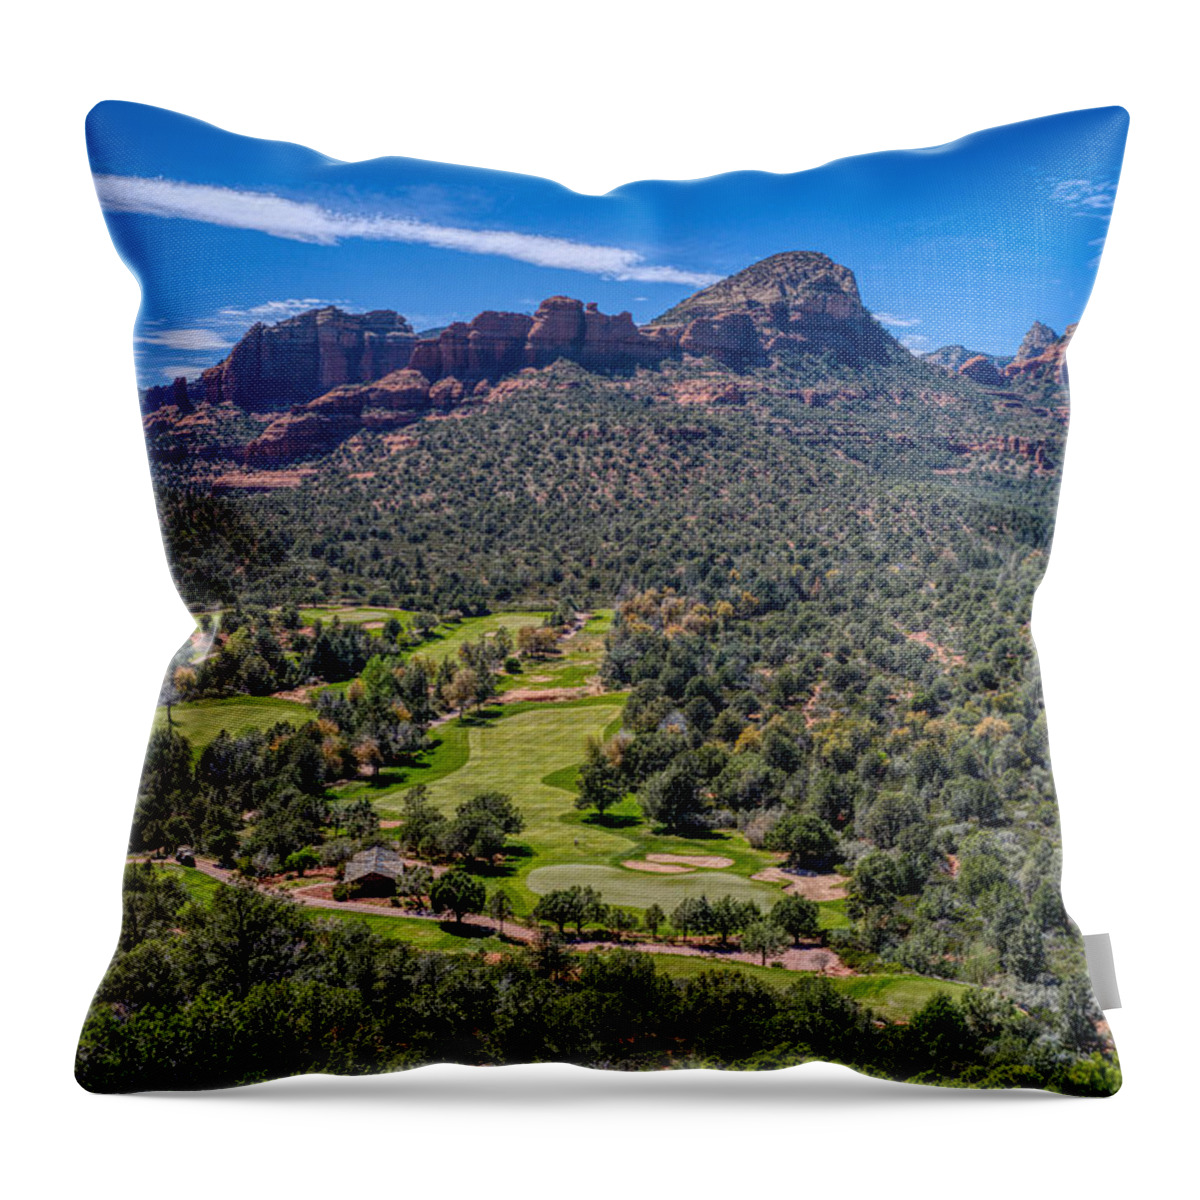 Sky Throw Pillow featuring the photograph Seven Canyons Sedona Golf Course by Anthony Giammarino